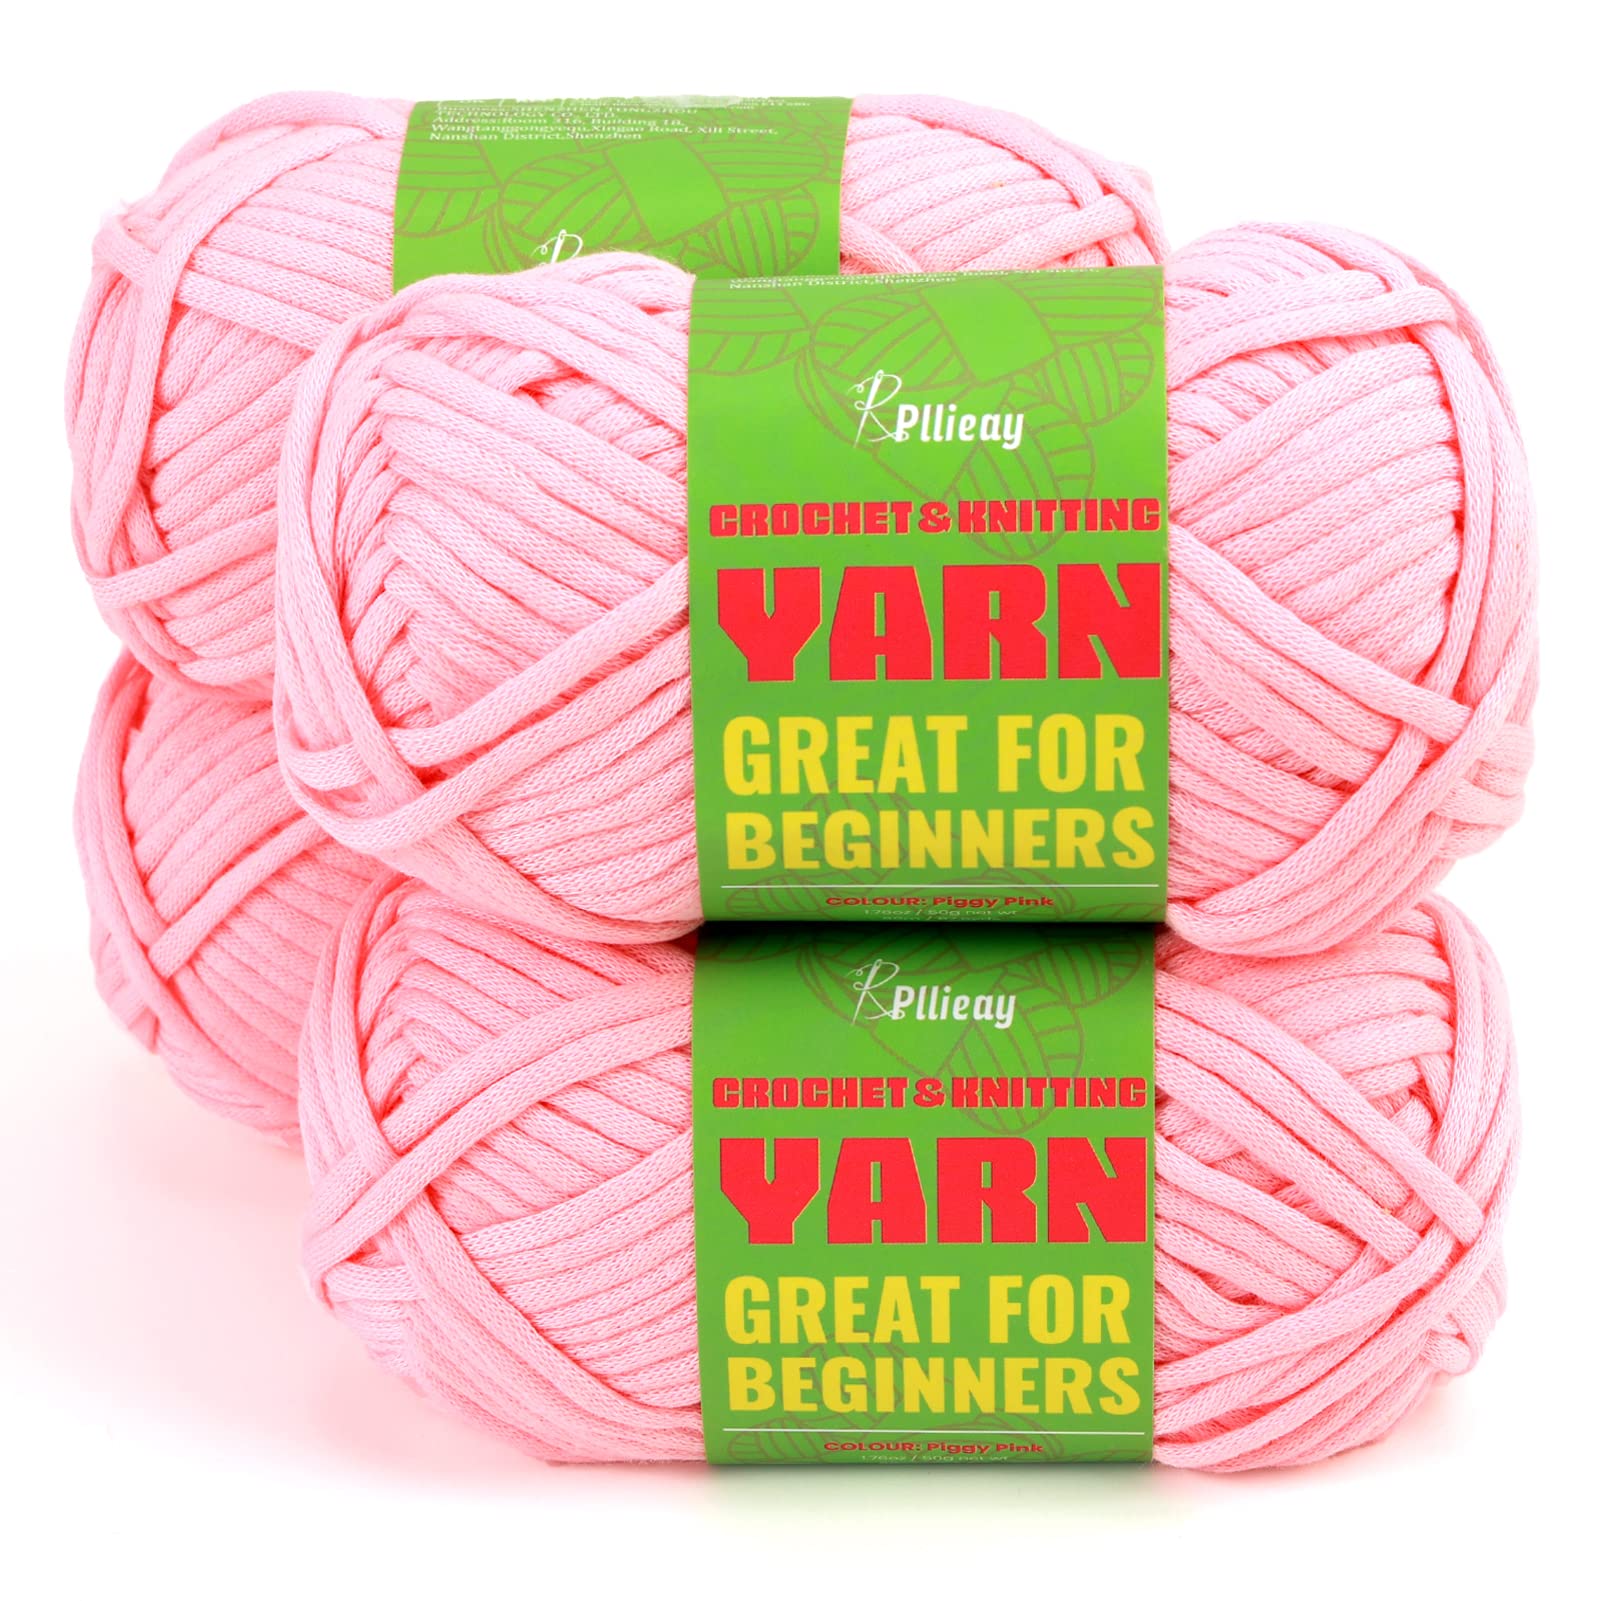 Pllieay Snowy White Cotton Yarn for Crocheting and Knitting, 4 Pack Crochet  Yarn for Beginners with Easy-to-See Stitches, Cotton-Nylon Blend Yarn for